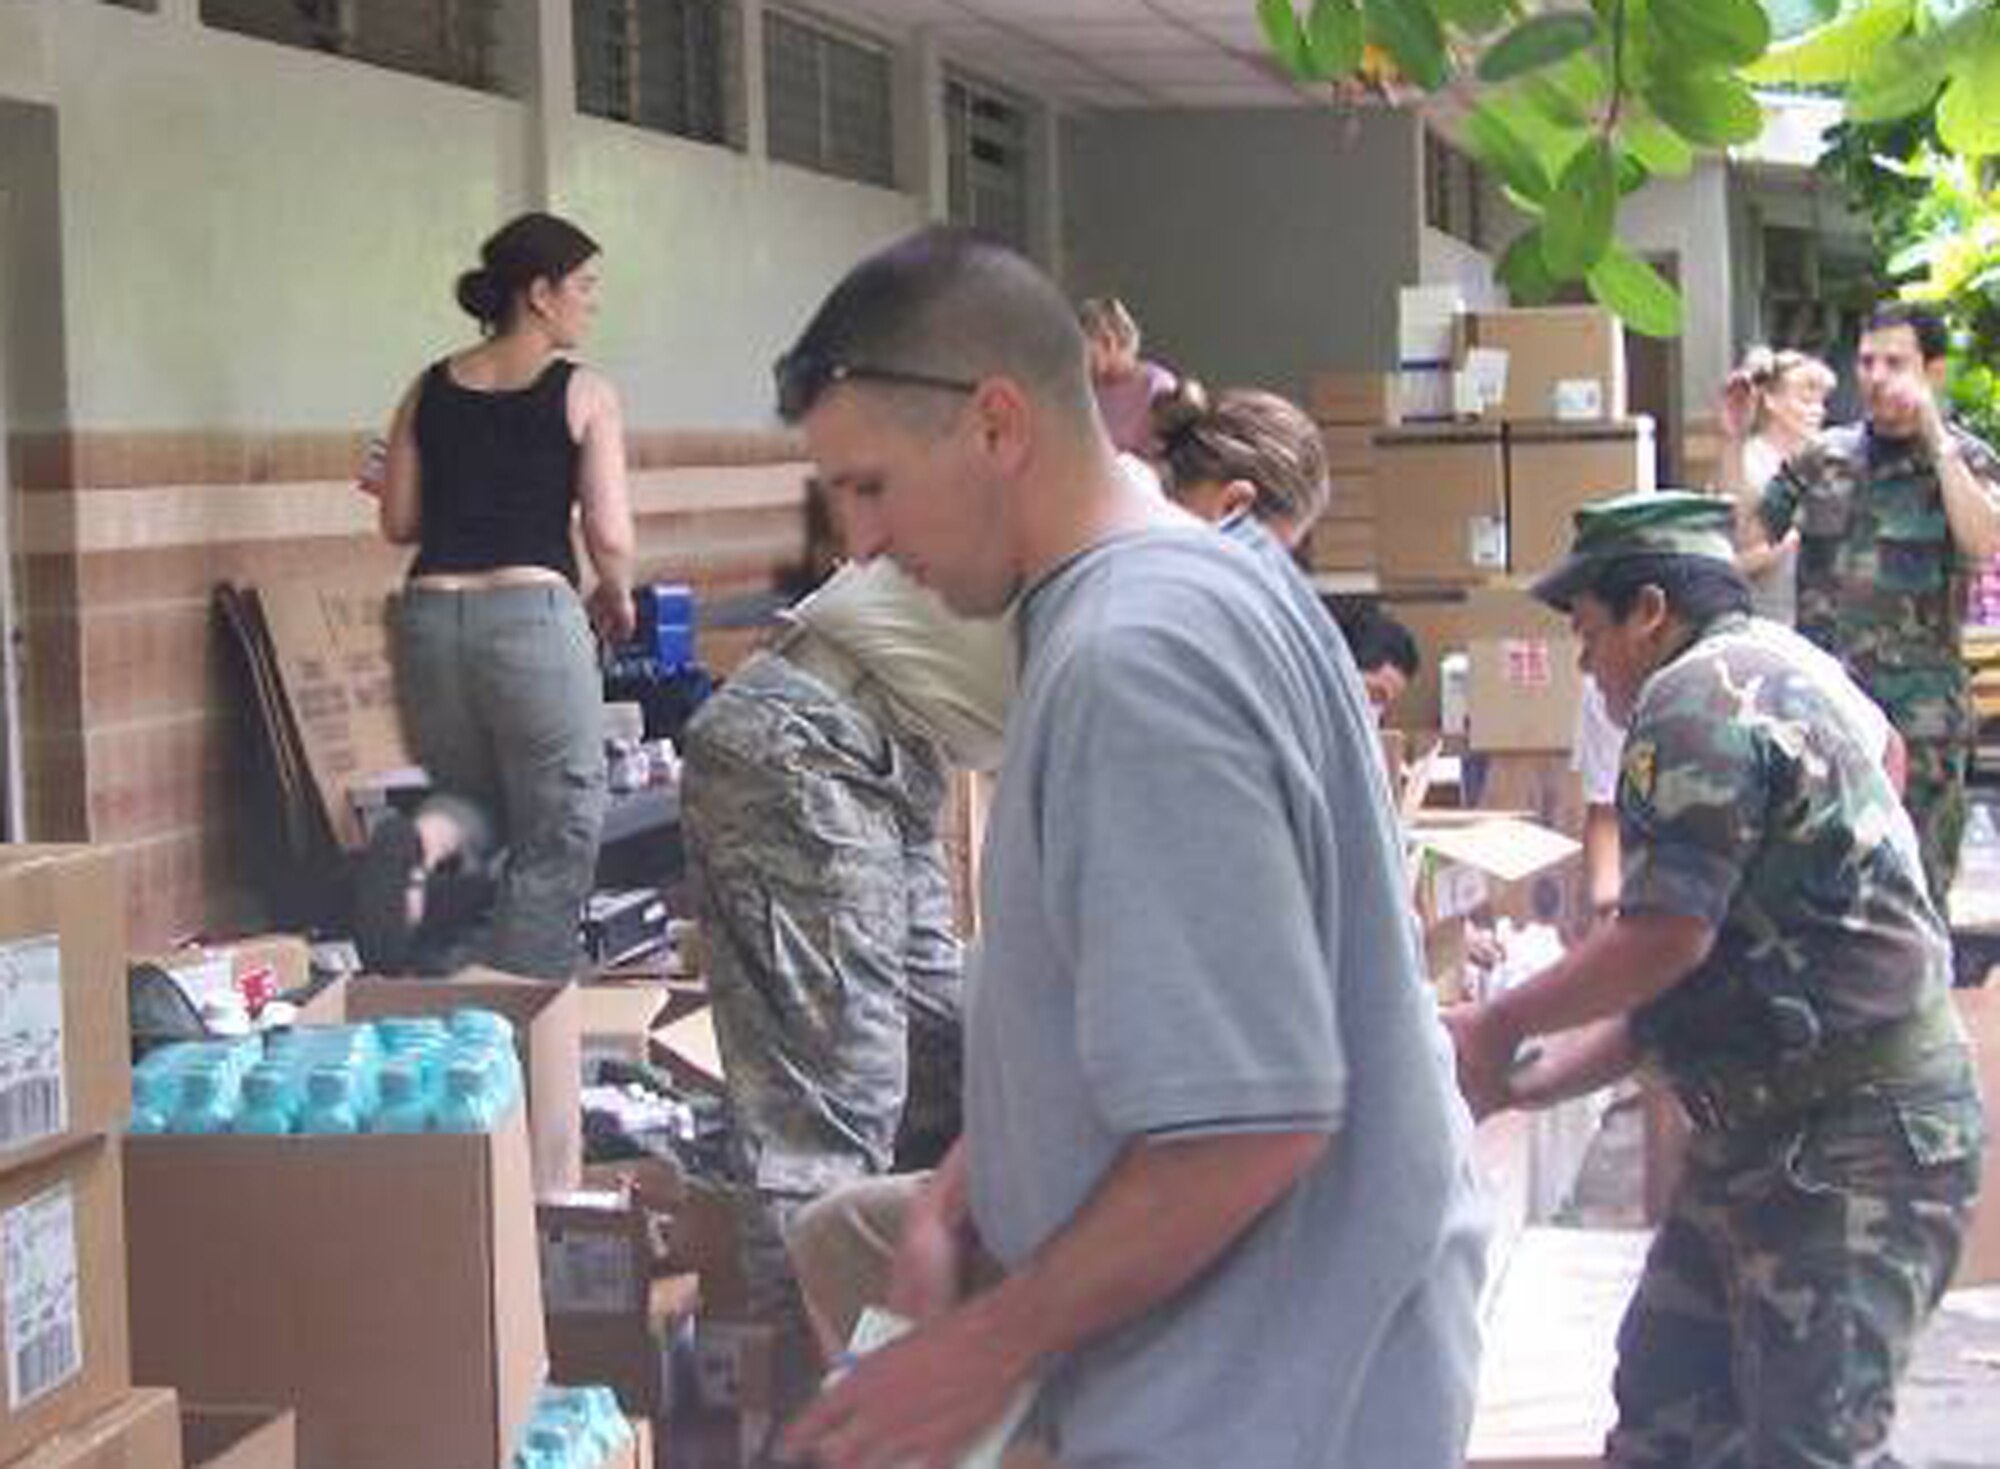 Capt. Doug Smith, 21st Medical Group nurse practitioner, helping to sort medications and supplies in San Miguel, El Salvador. Members of the 21st Medical Group are supporting the Central American exercise as part of an ongoing U.S. Southern Command exercise. (U.S. Air Force photo)